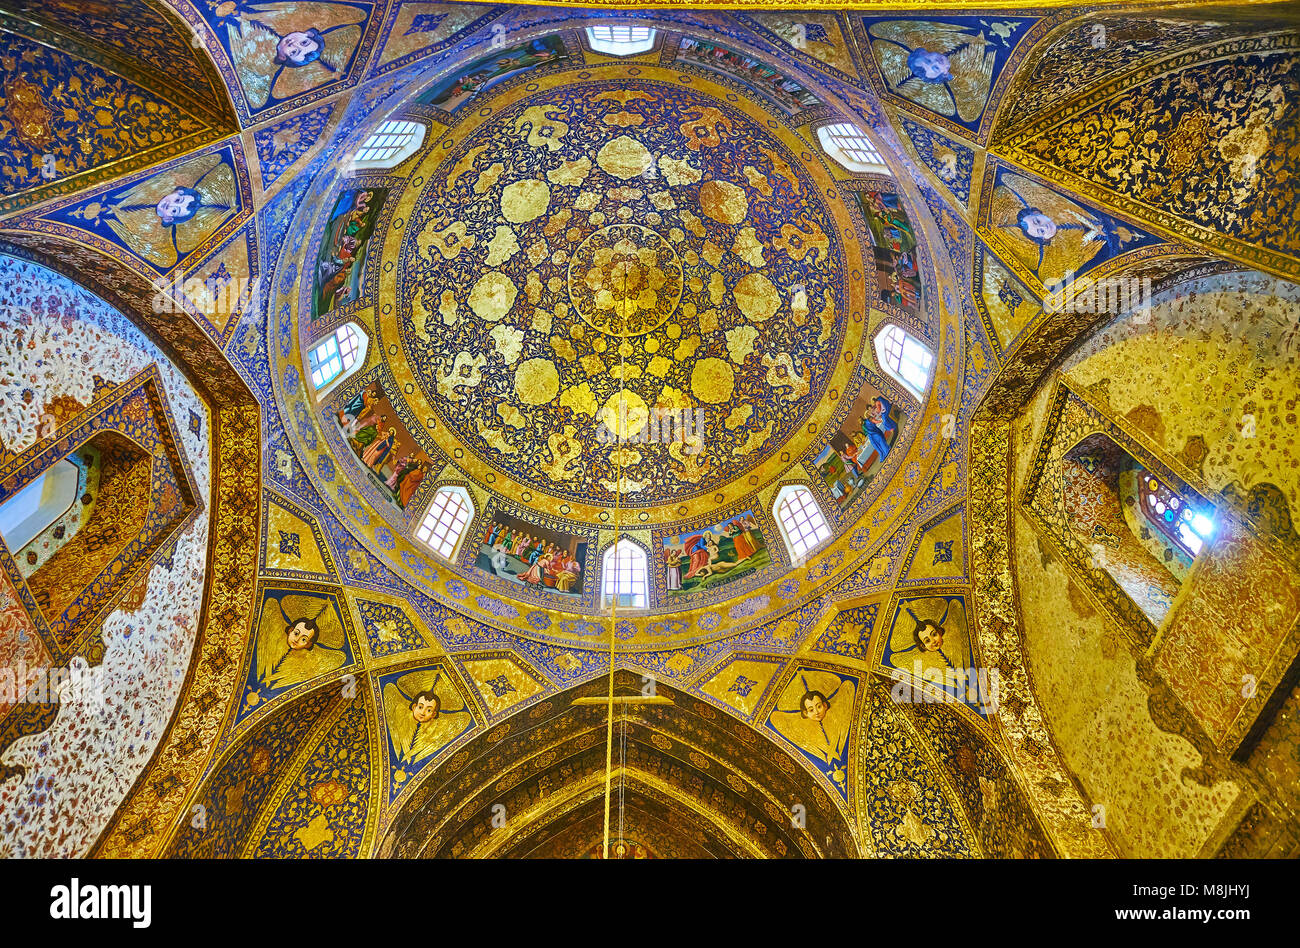 ISFAHAN, IRAN - OCTOBER 20,2017: The dome and walls of Armenian Bethlehem Church in New Julfa are decorated with complex golden patterns and colored i Stock Photo